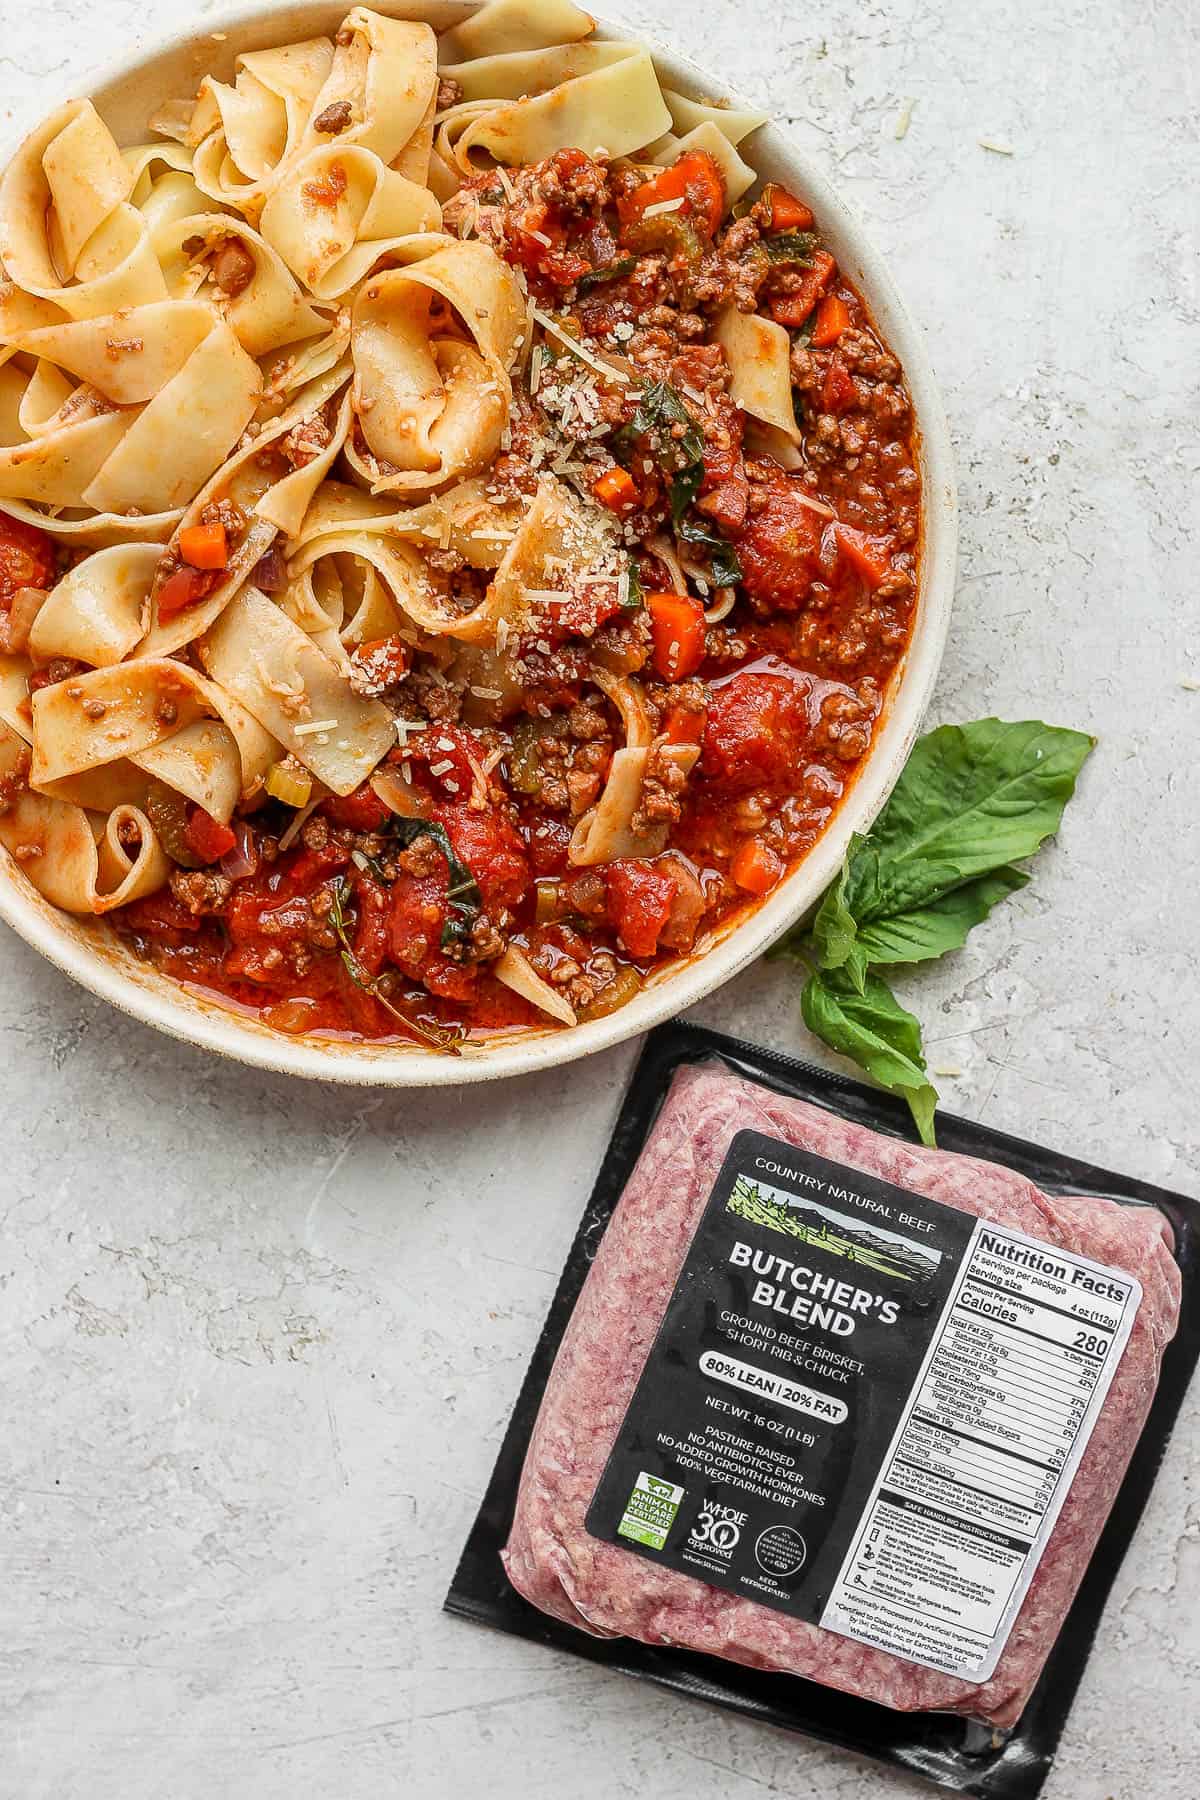 Bowl of pappardelle bolognese with a package of butcher's blend ground beef.